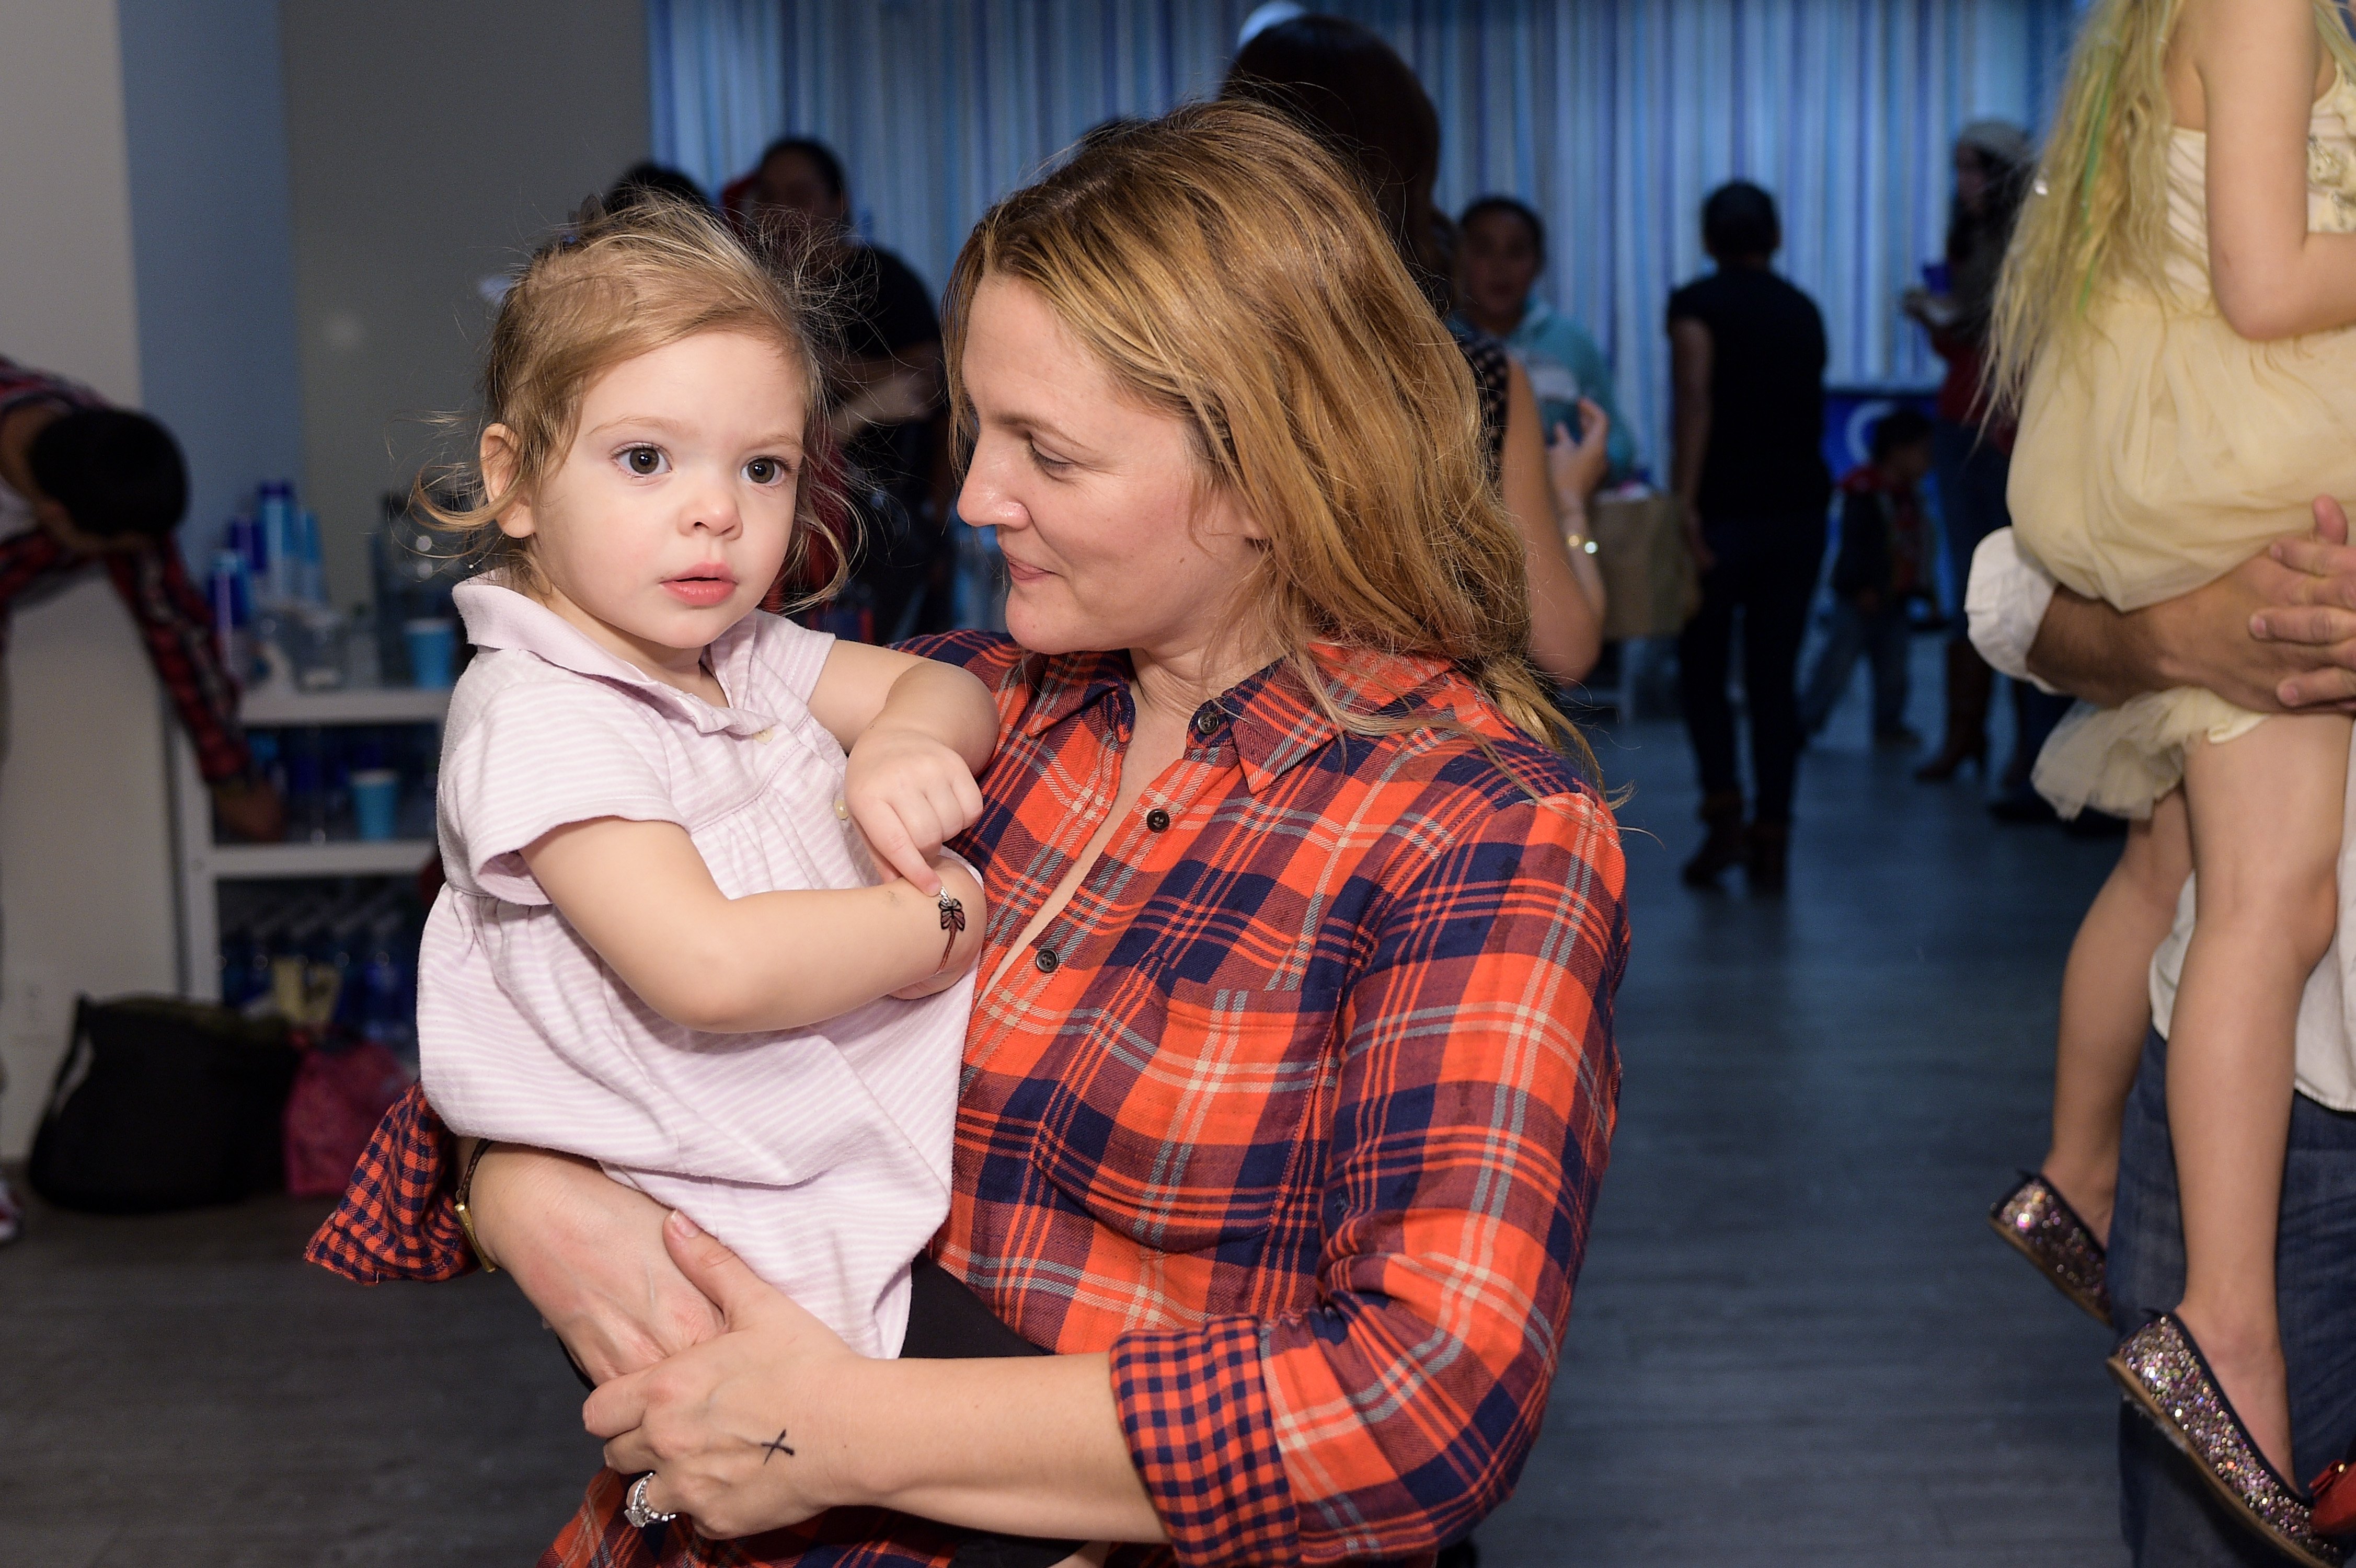 Drew Barrymore and her daughter at the Baby2Baby Holiday Party Presented By The Honest Company on December 13, 2014, in Los Angeles, California. | Source: Getty Images